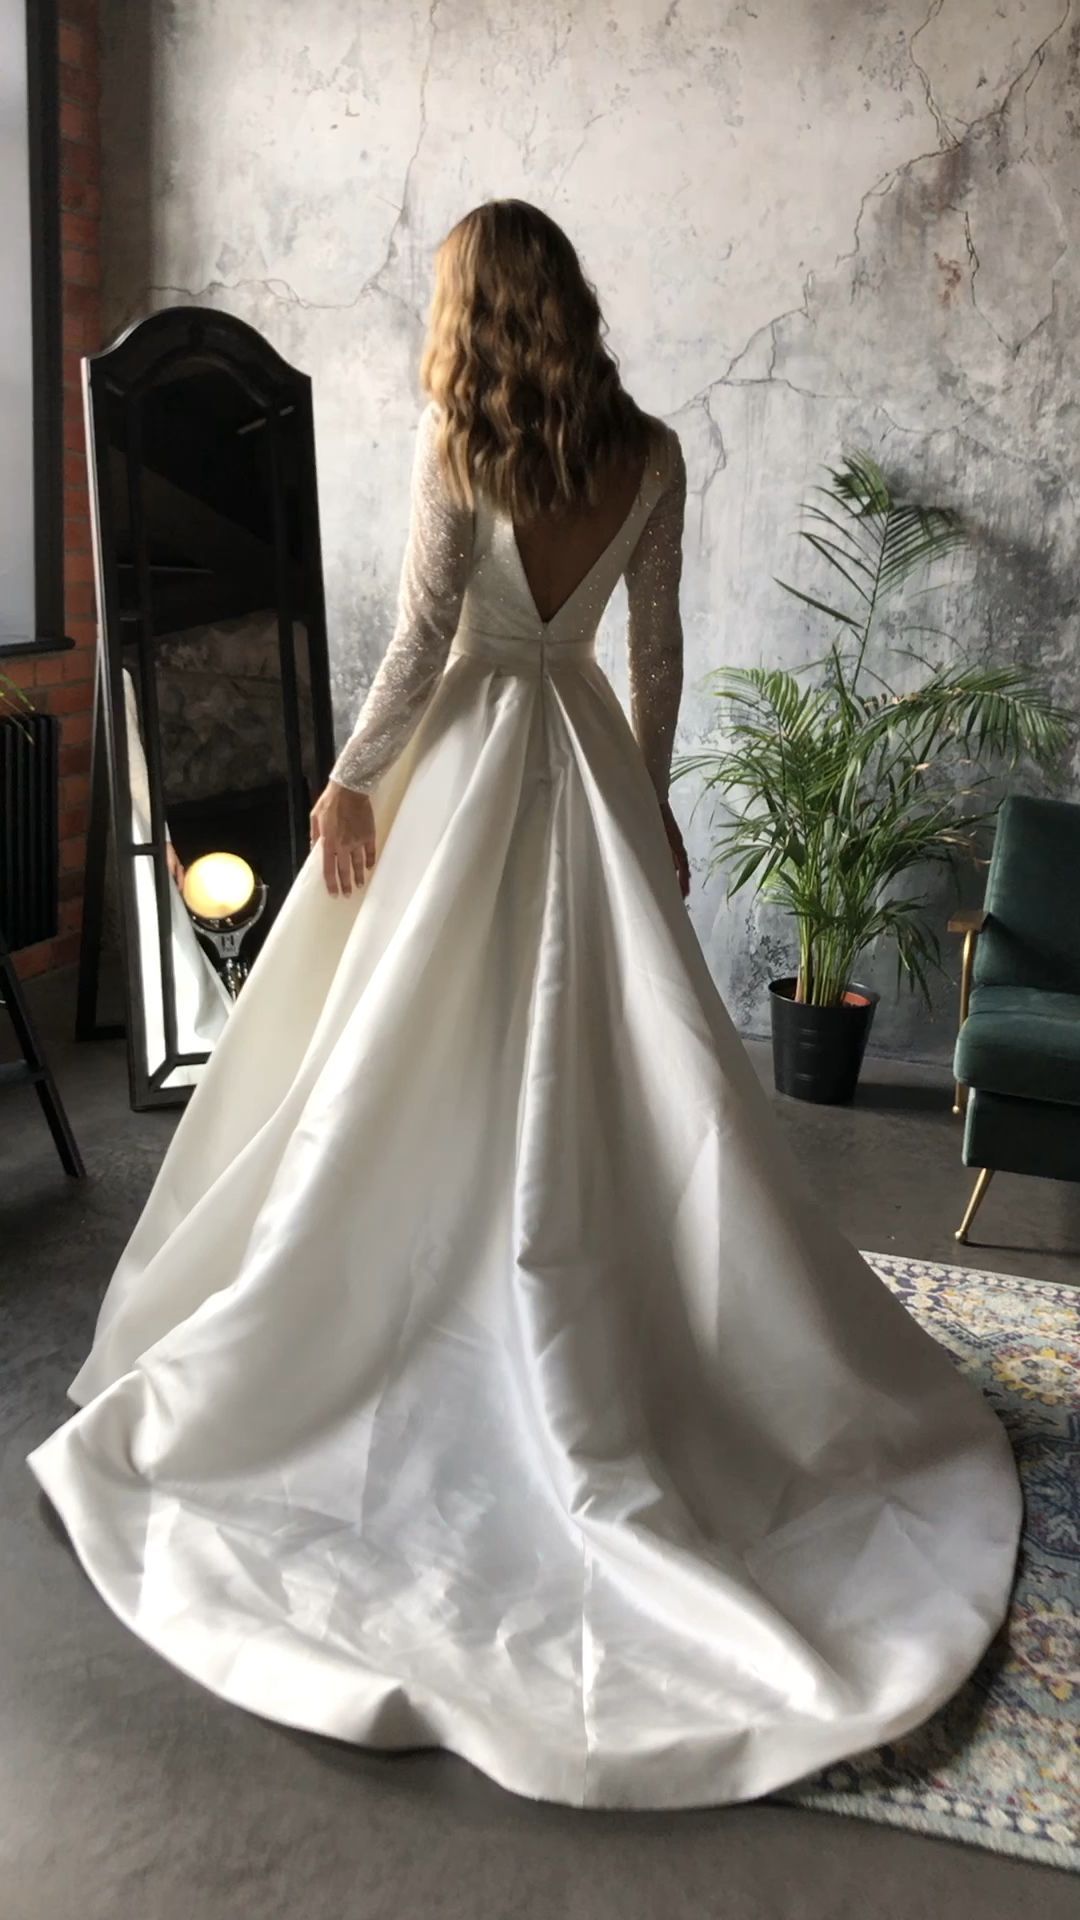 Sparkly wedding dress Koussindy long a sleeves by Olivia Bottega. -   19 wedding Gown with sleeves ideas